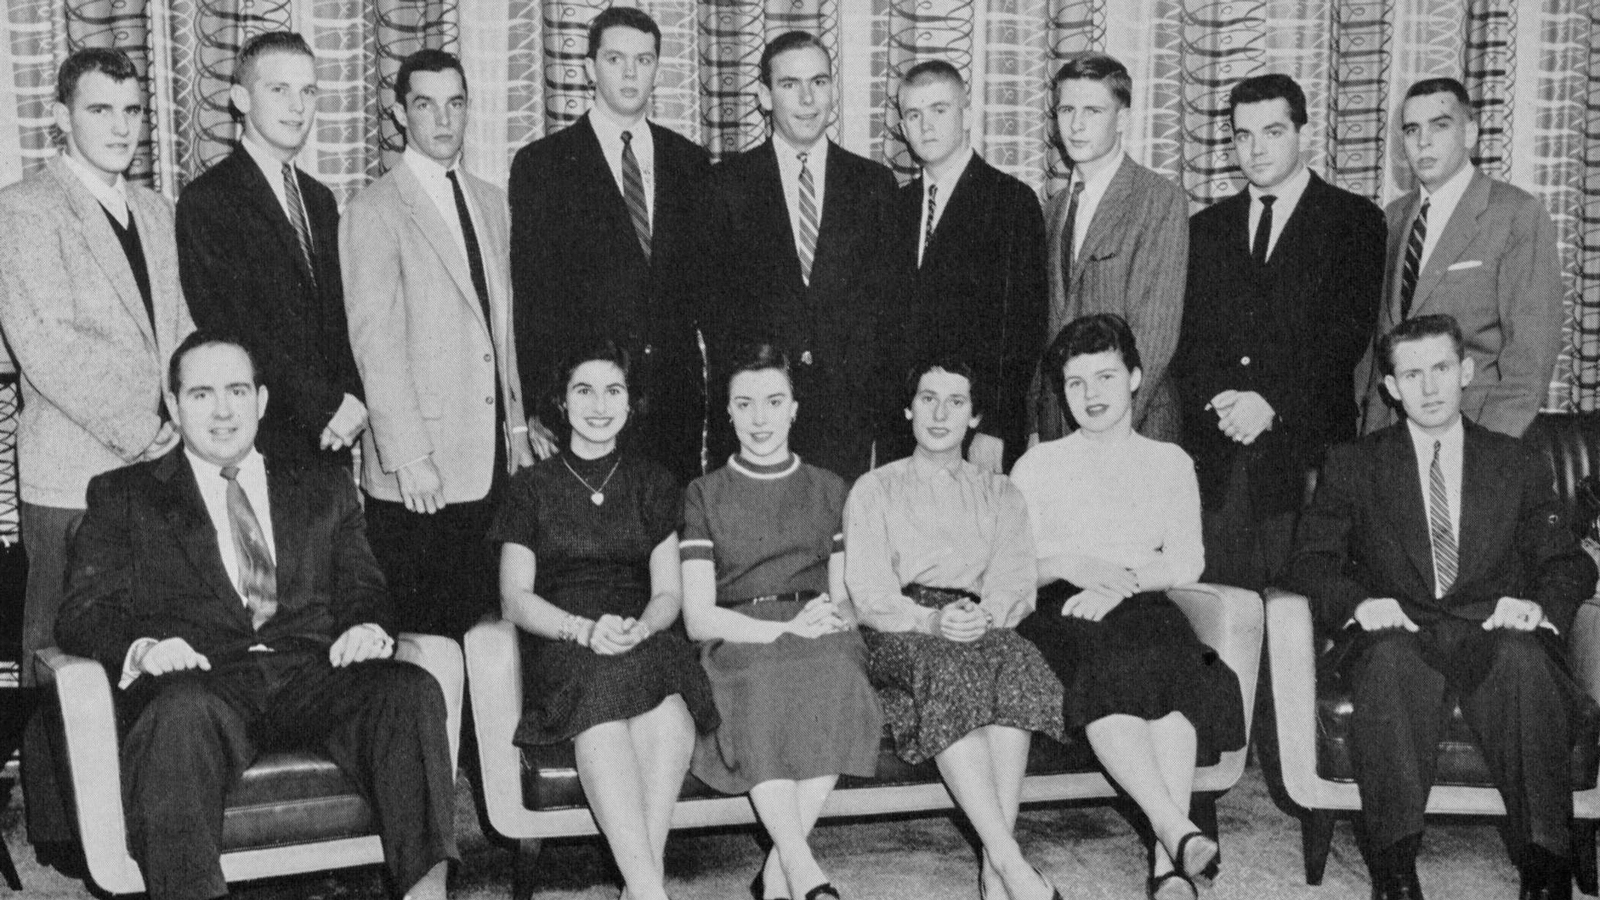 Feeney is pictured at bottom right in this 1956 photo of the Cornell Hotel Association